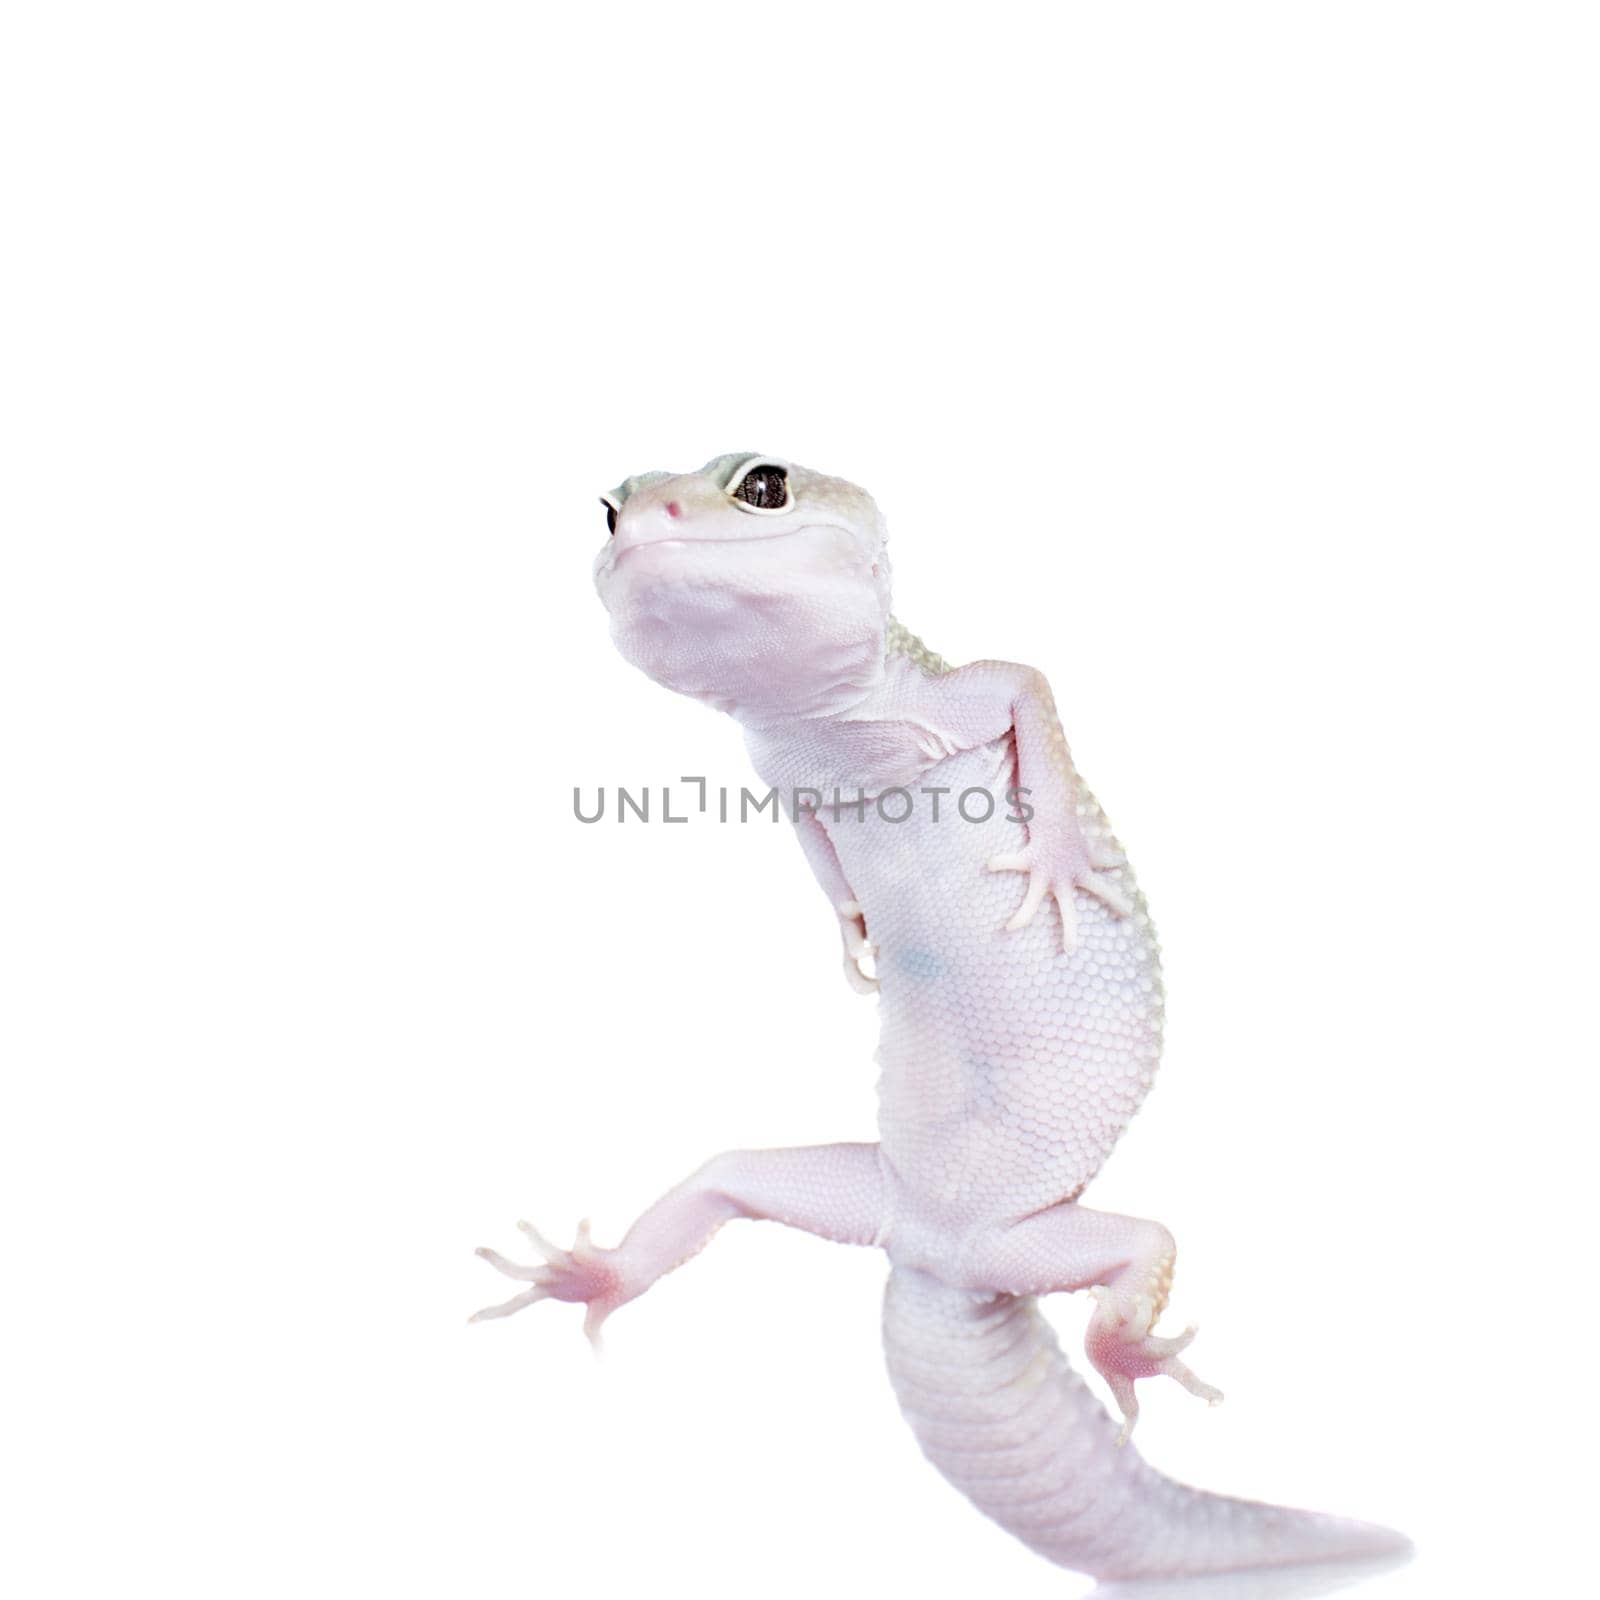 Leopard Gecko dancing on a white background by RosaJay